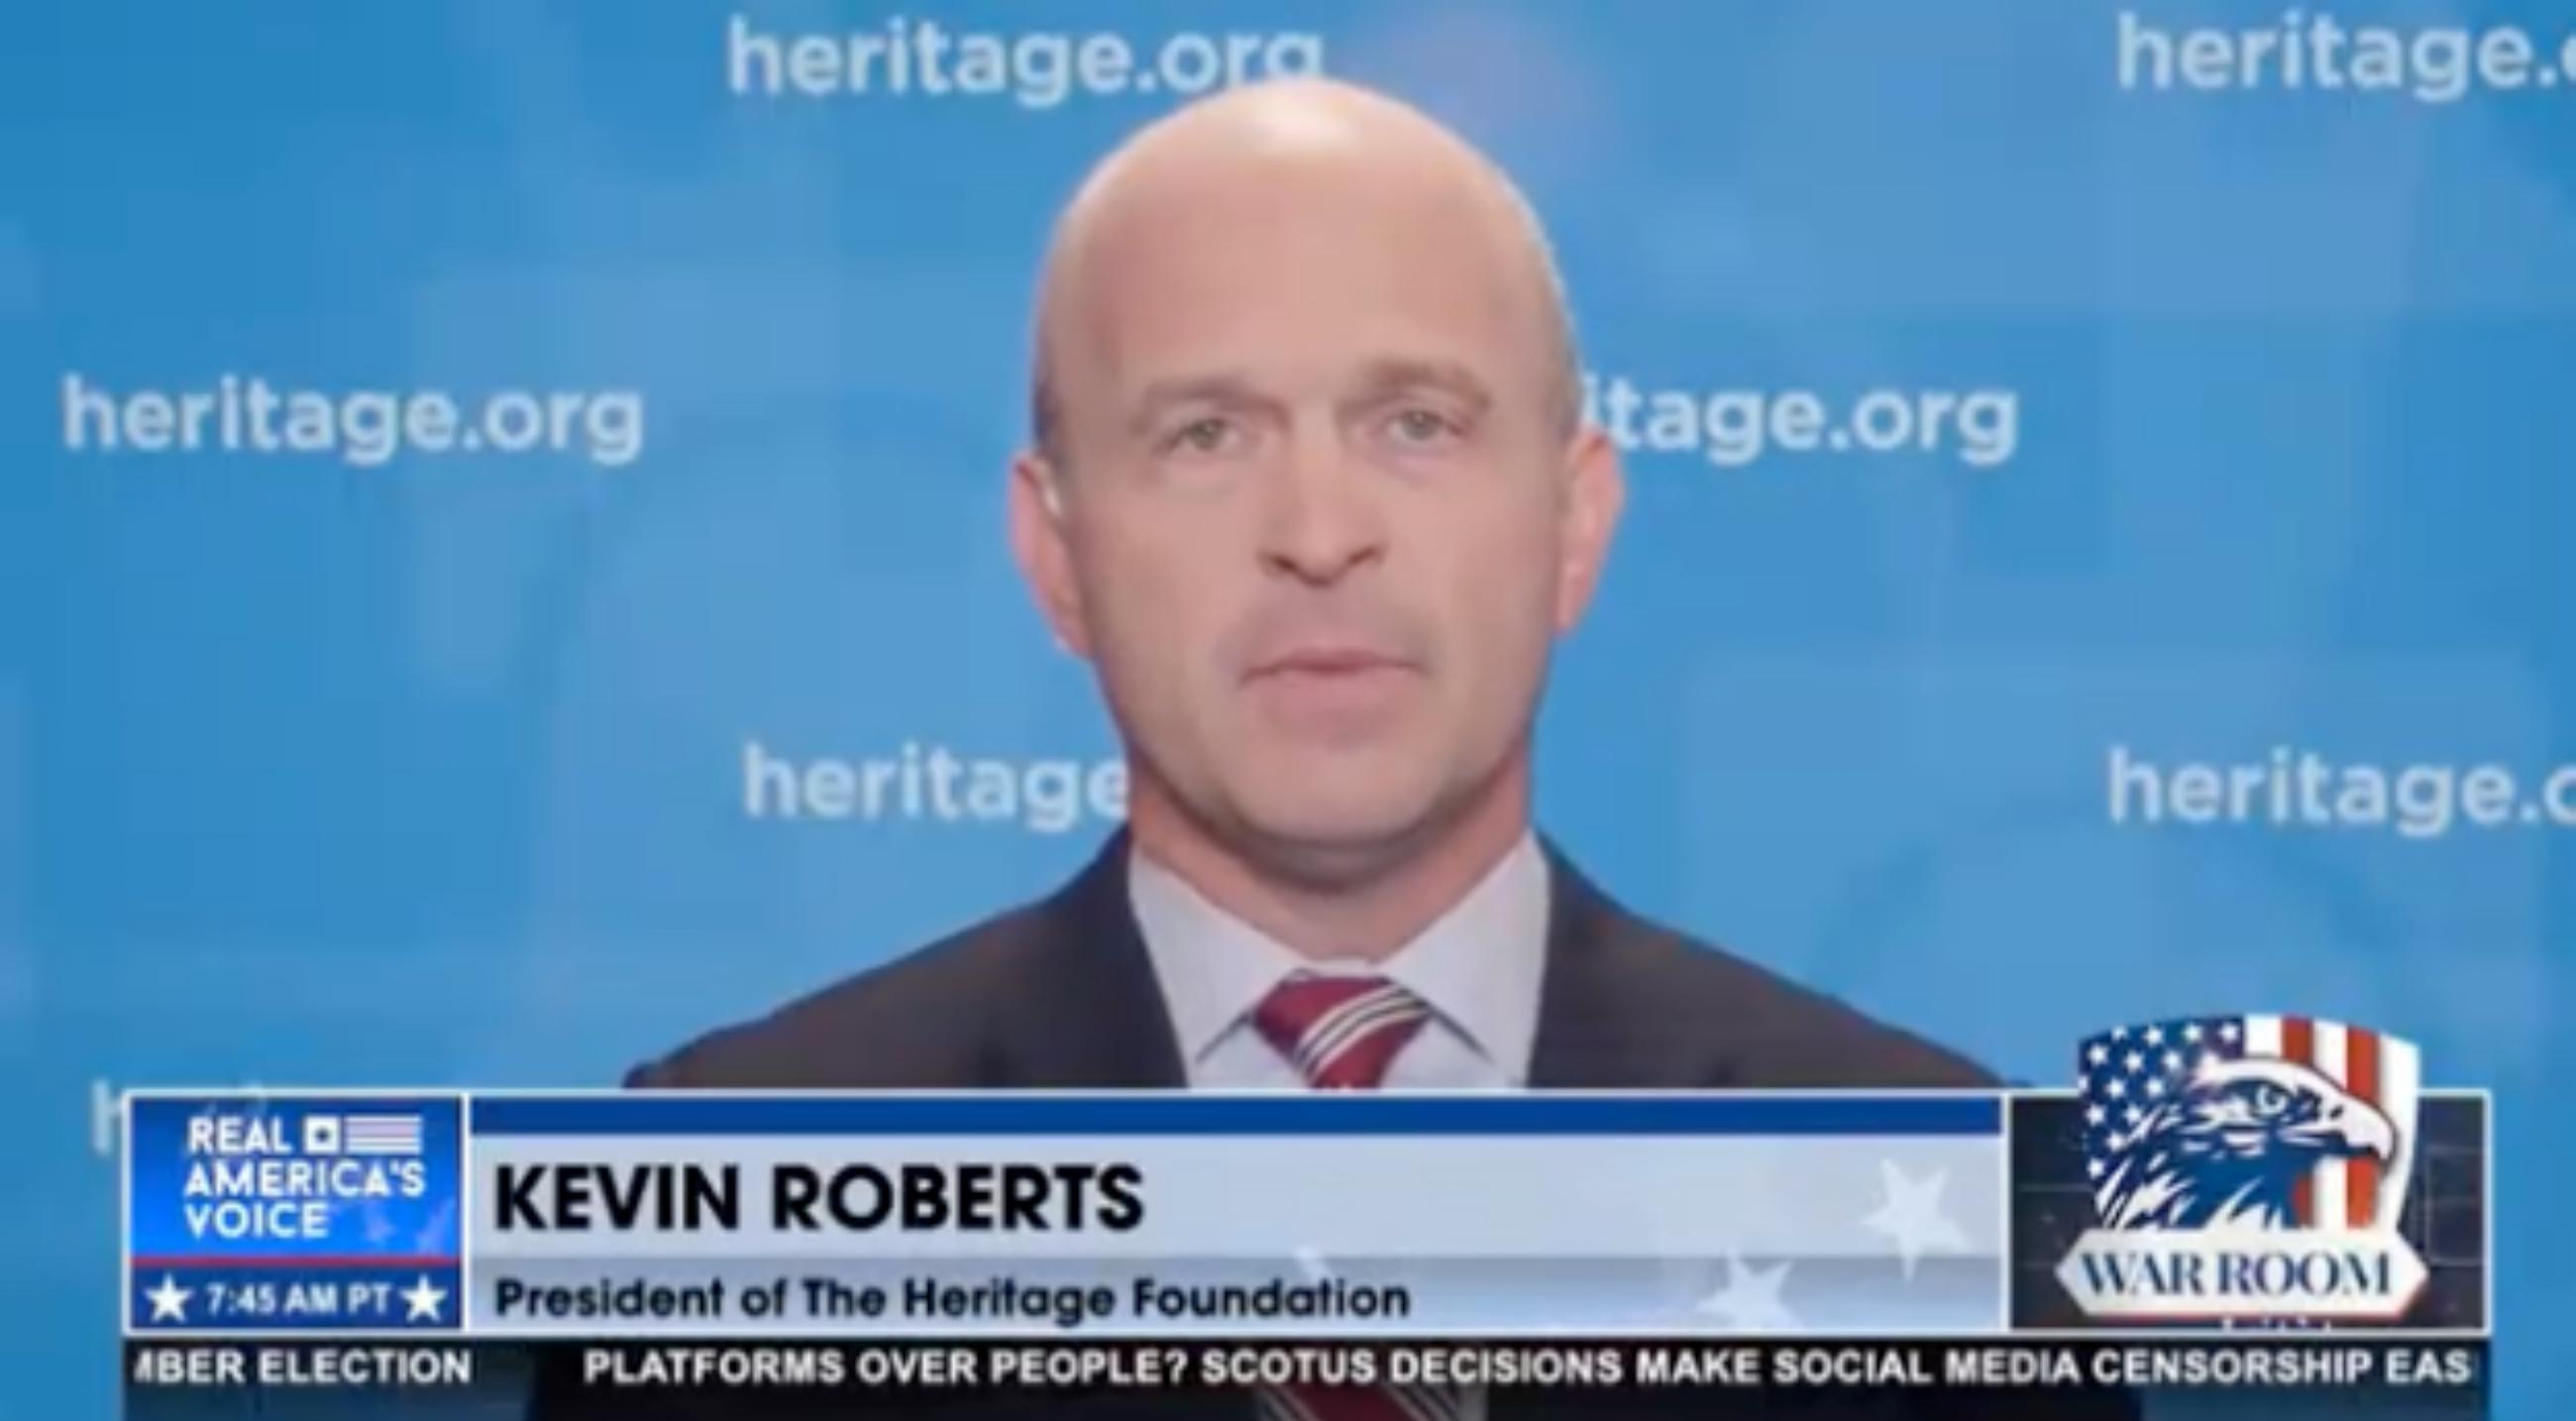 Heritage Foundation president celebrates Supreme Court immunity decision: "We are in the process of the second American Revolution"